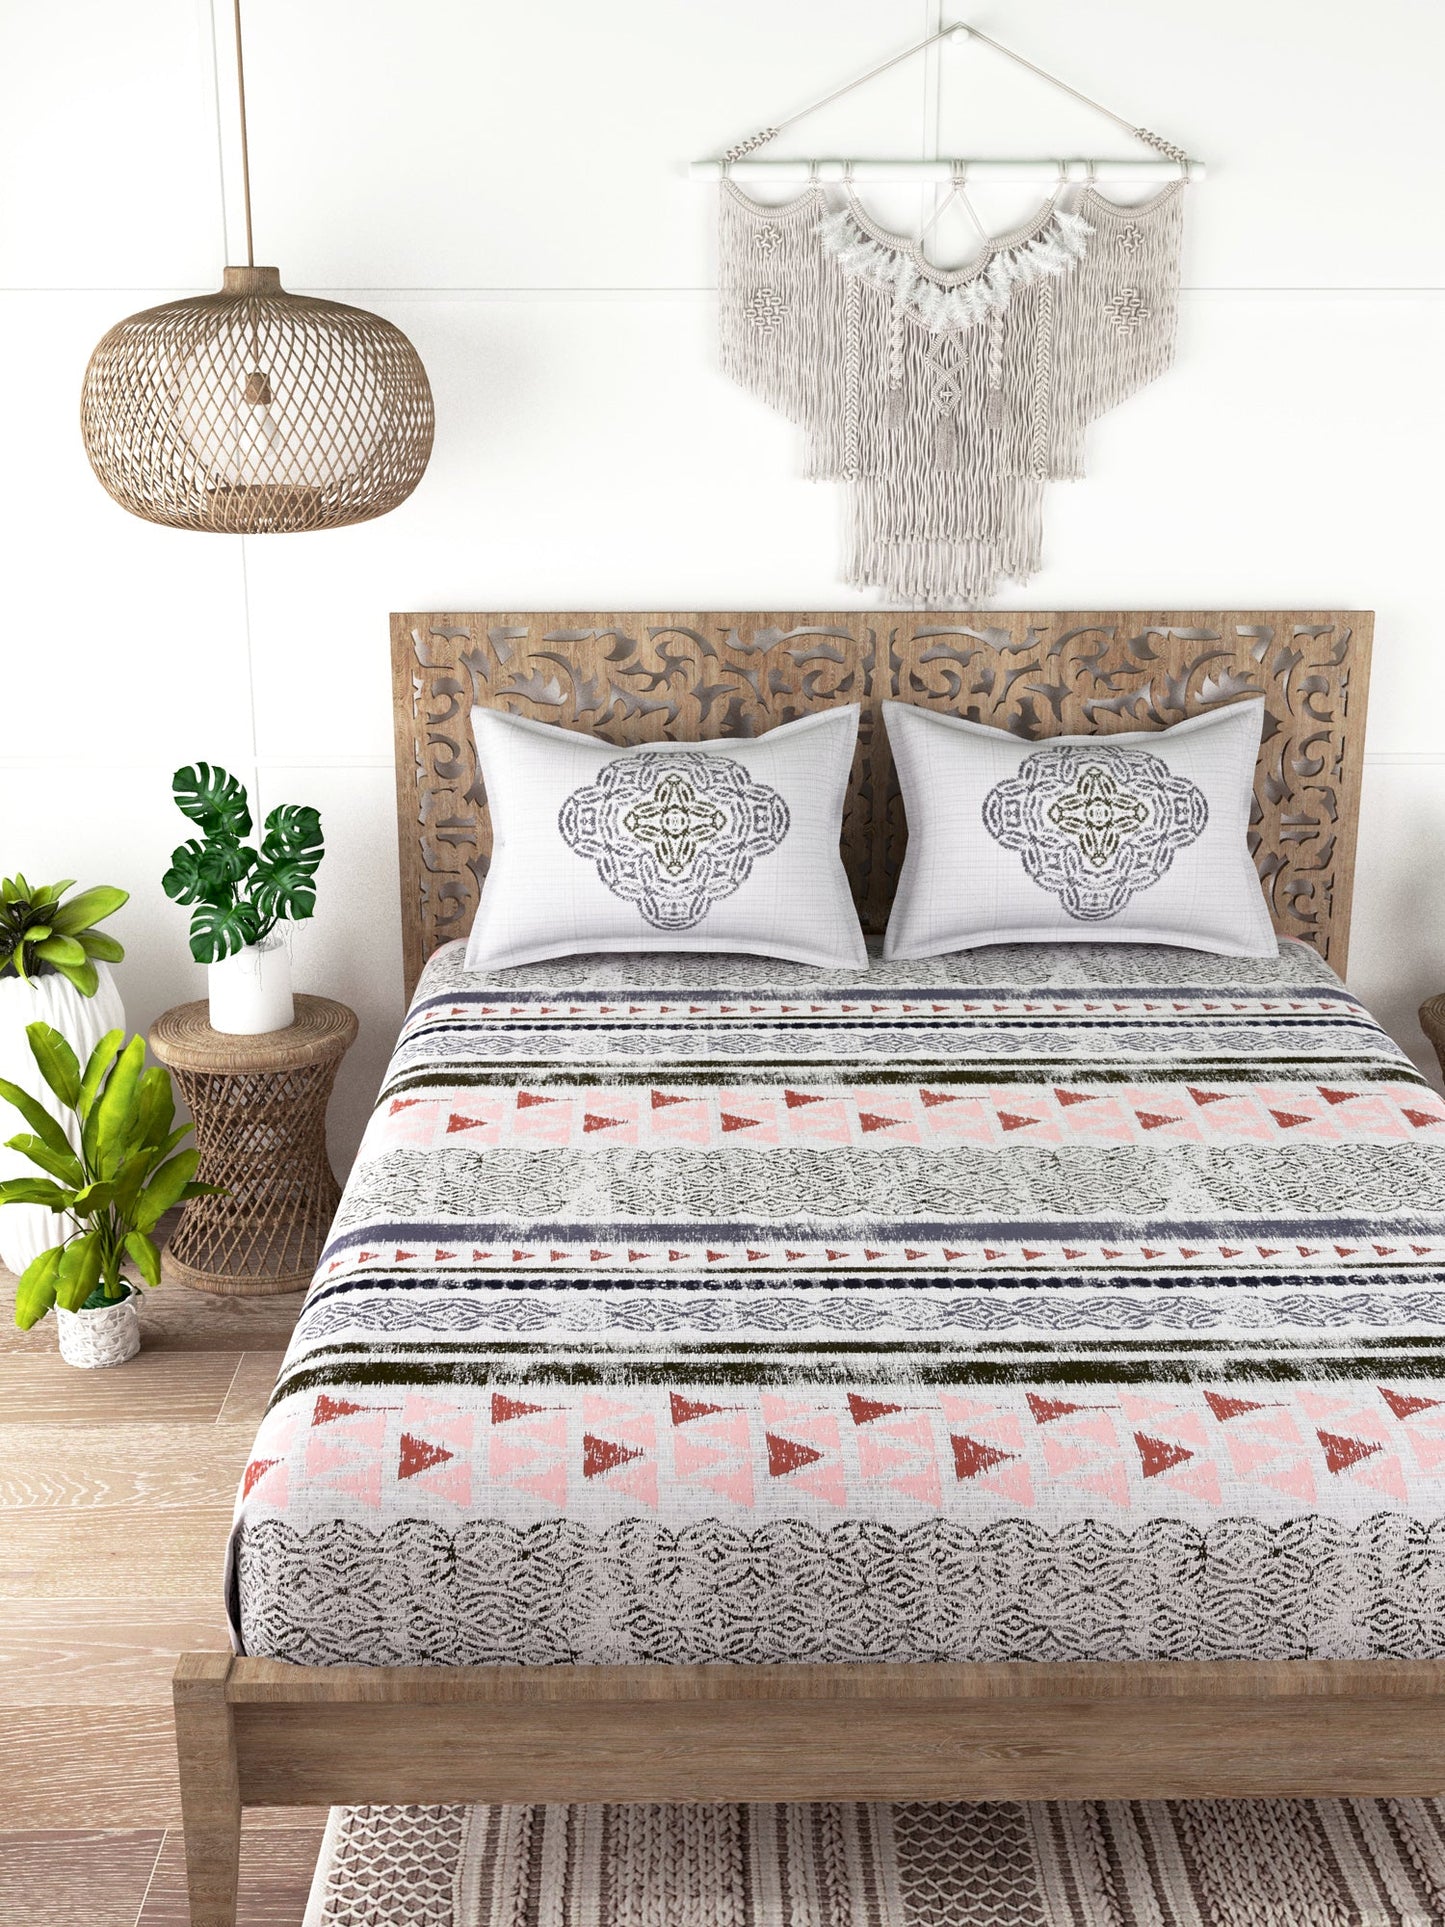 EVER HOME Printed 100%Cotton Super King Size Bedsheet Set for Double Bed